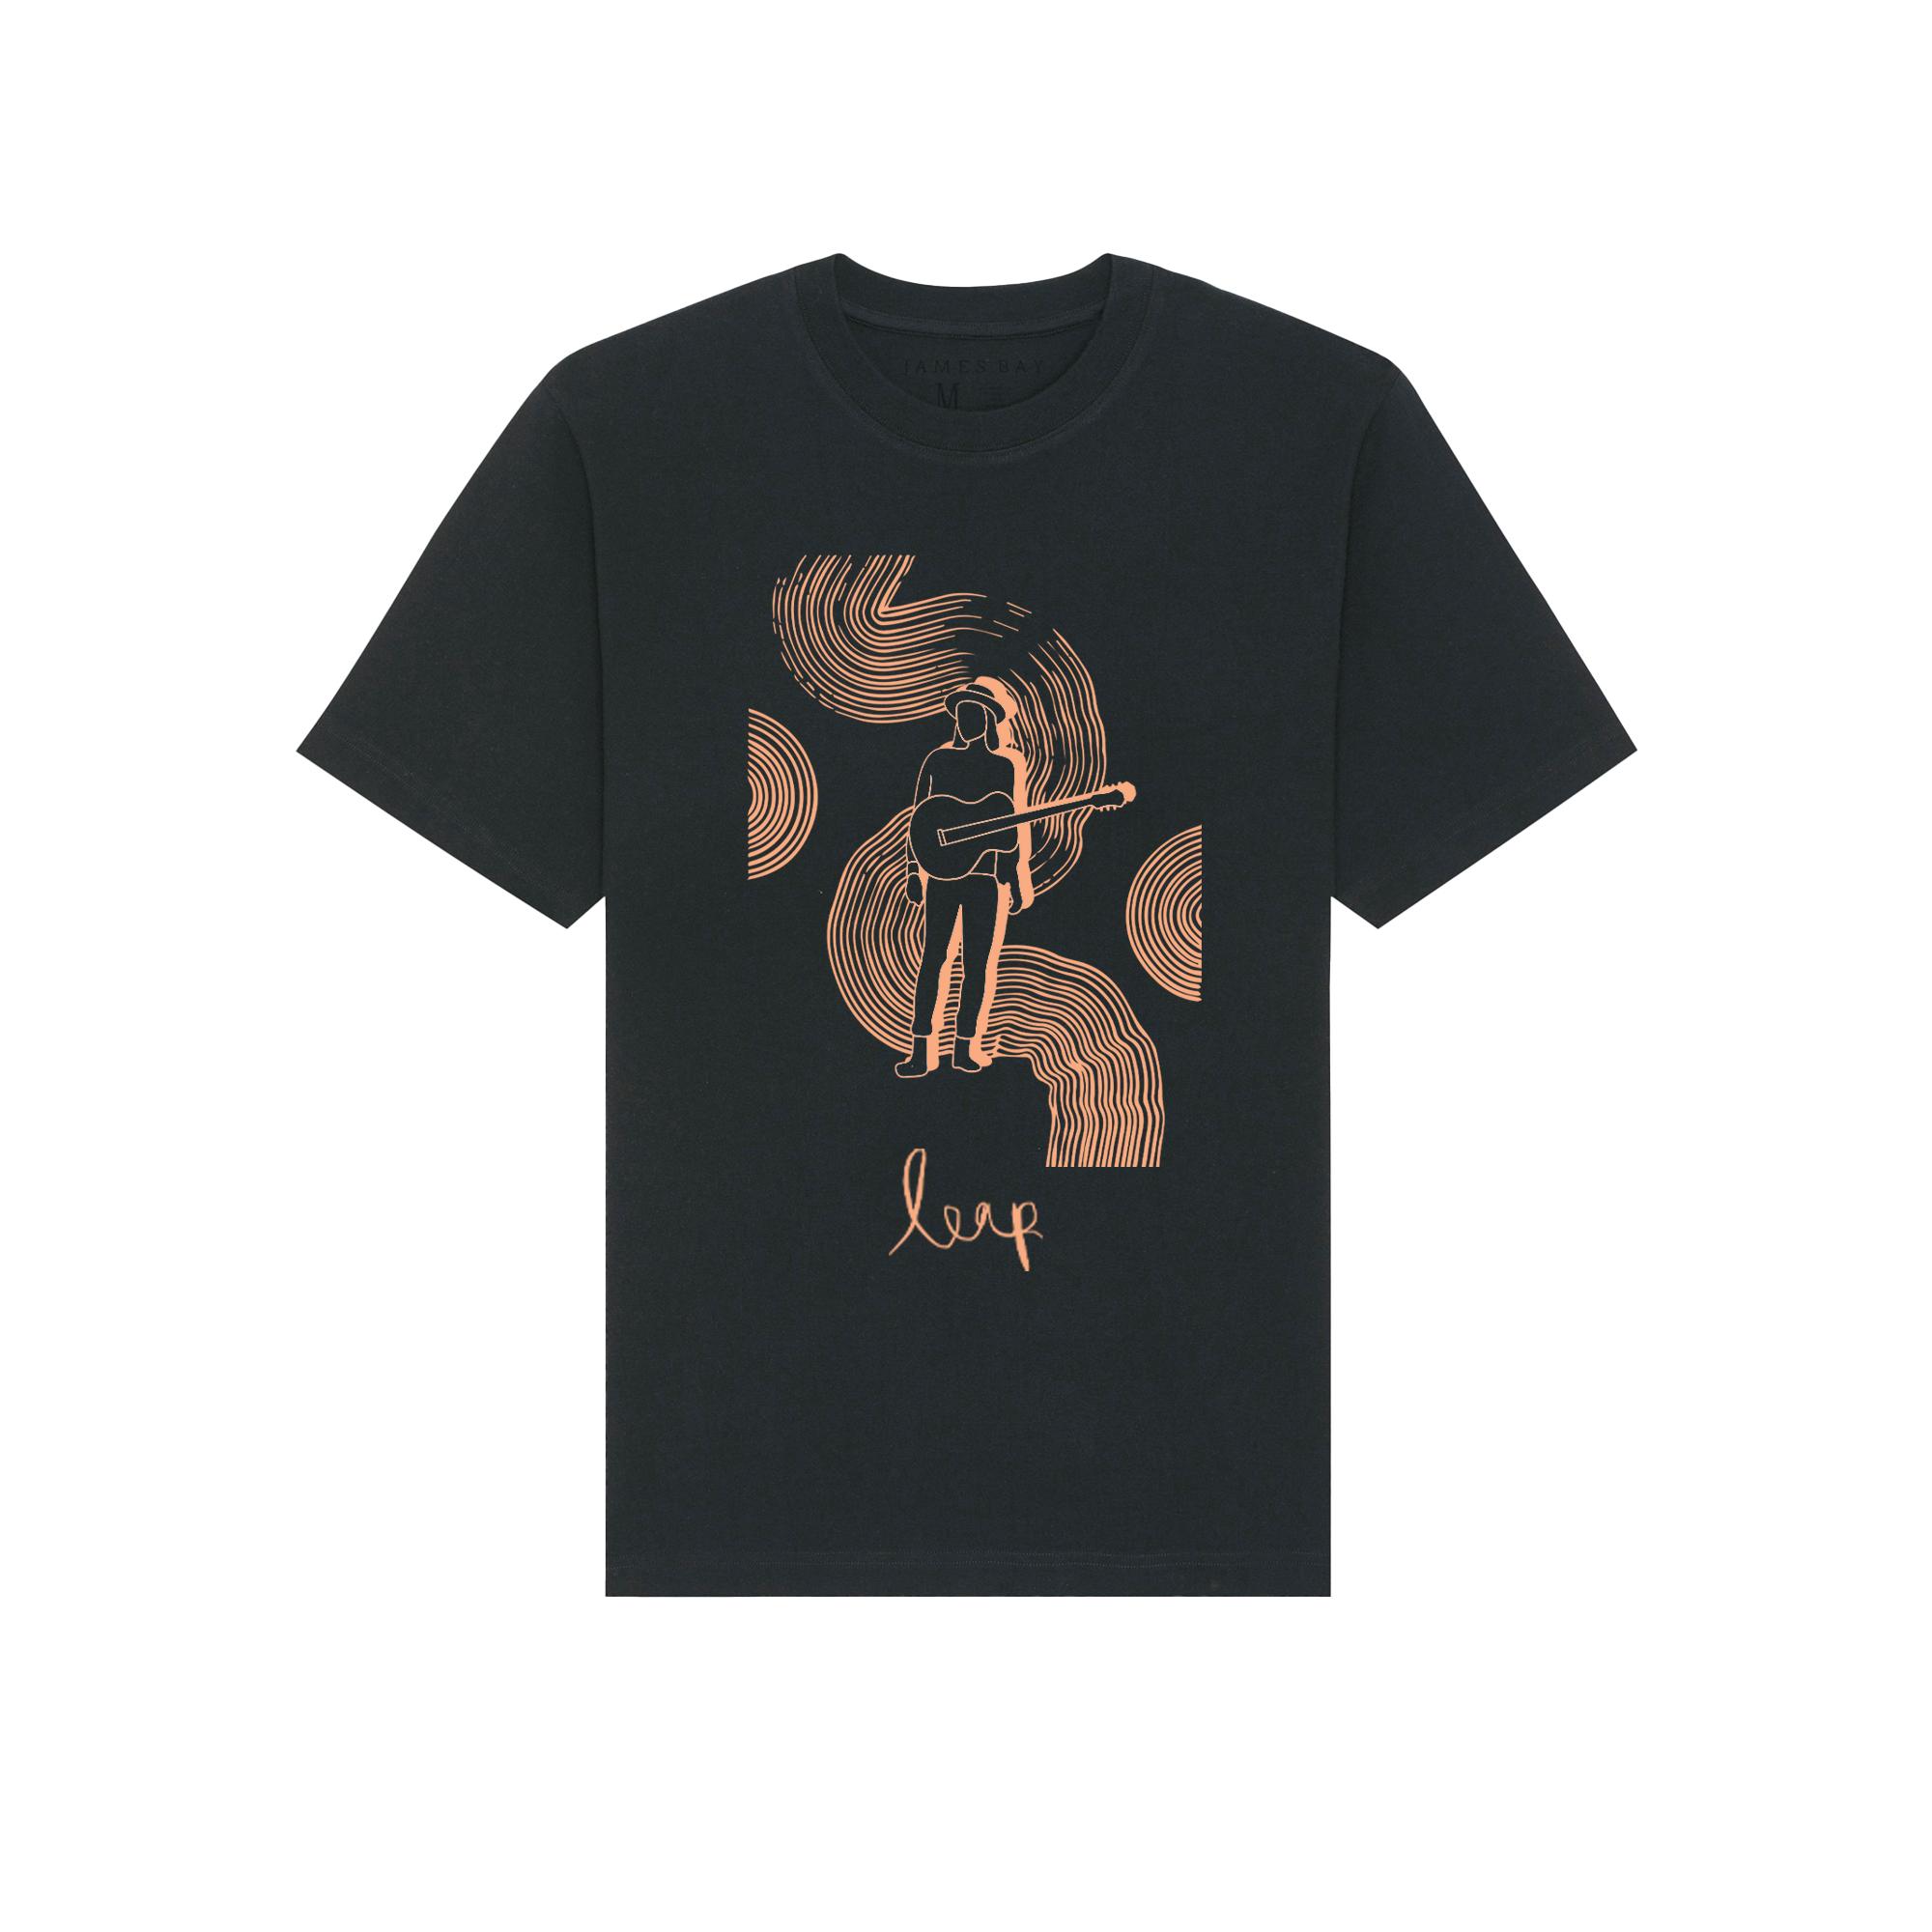 James Bay - Leap T-Shirt Abstract Line.